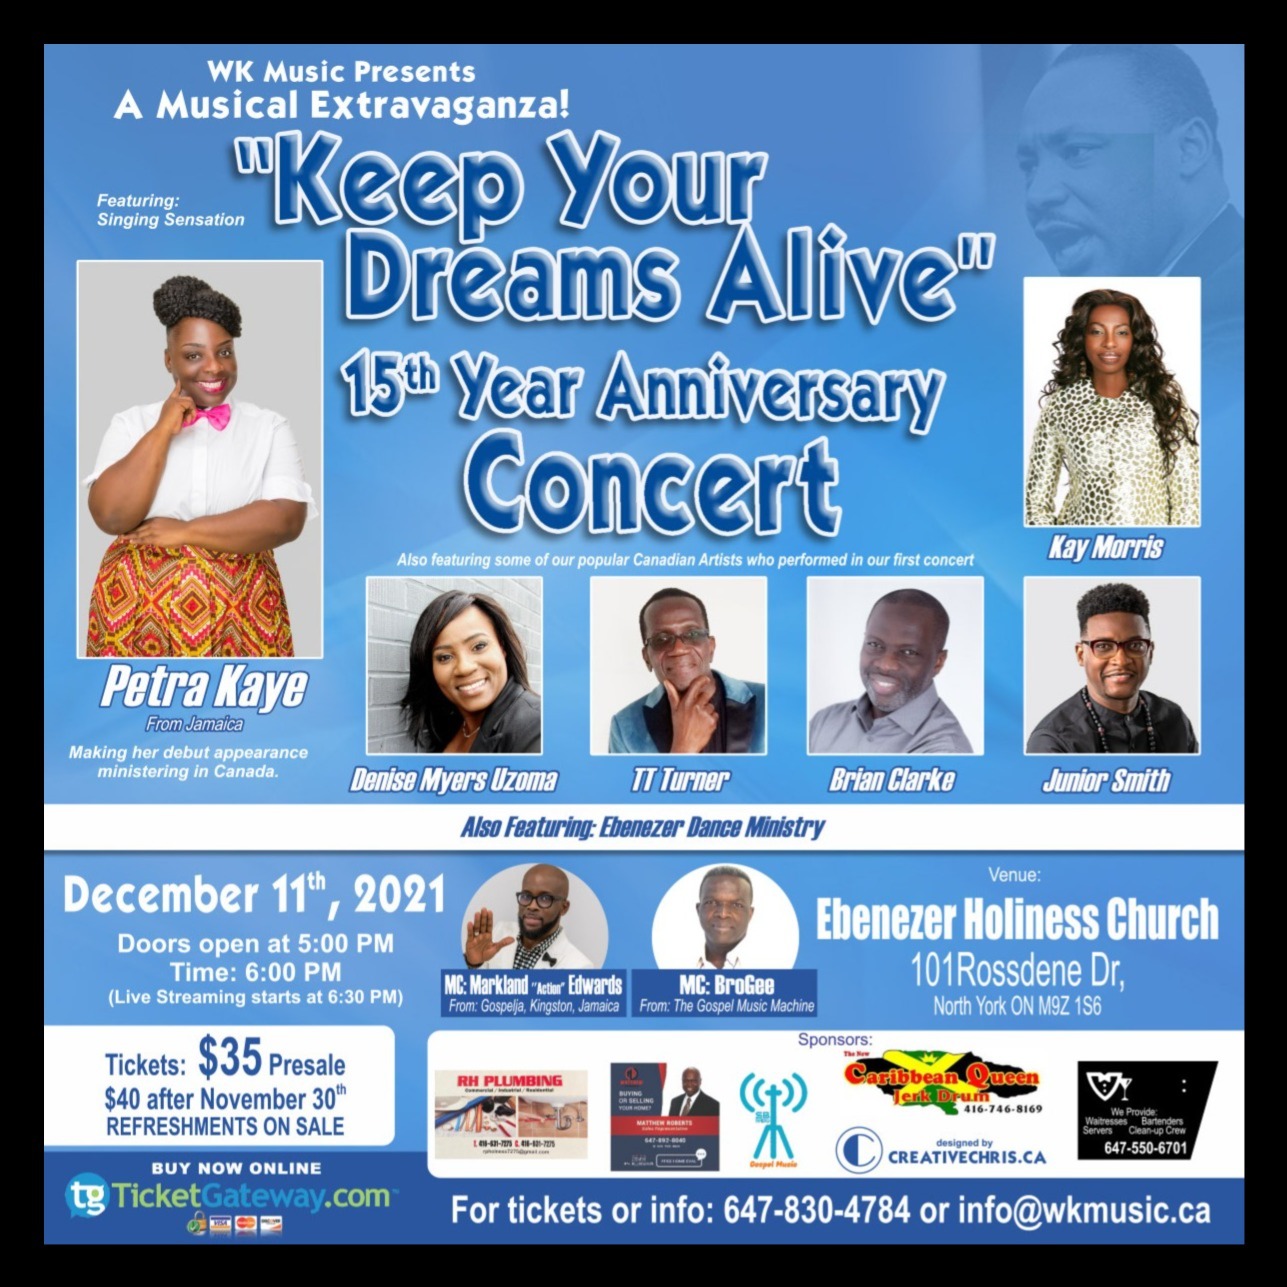 Keep Your Dreams Alive: 15th Year Anniversary Concert